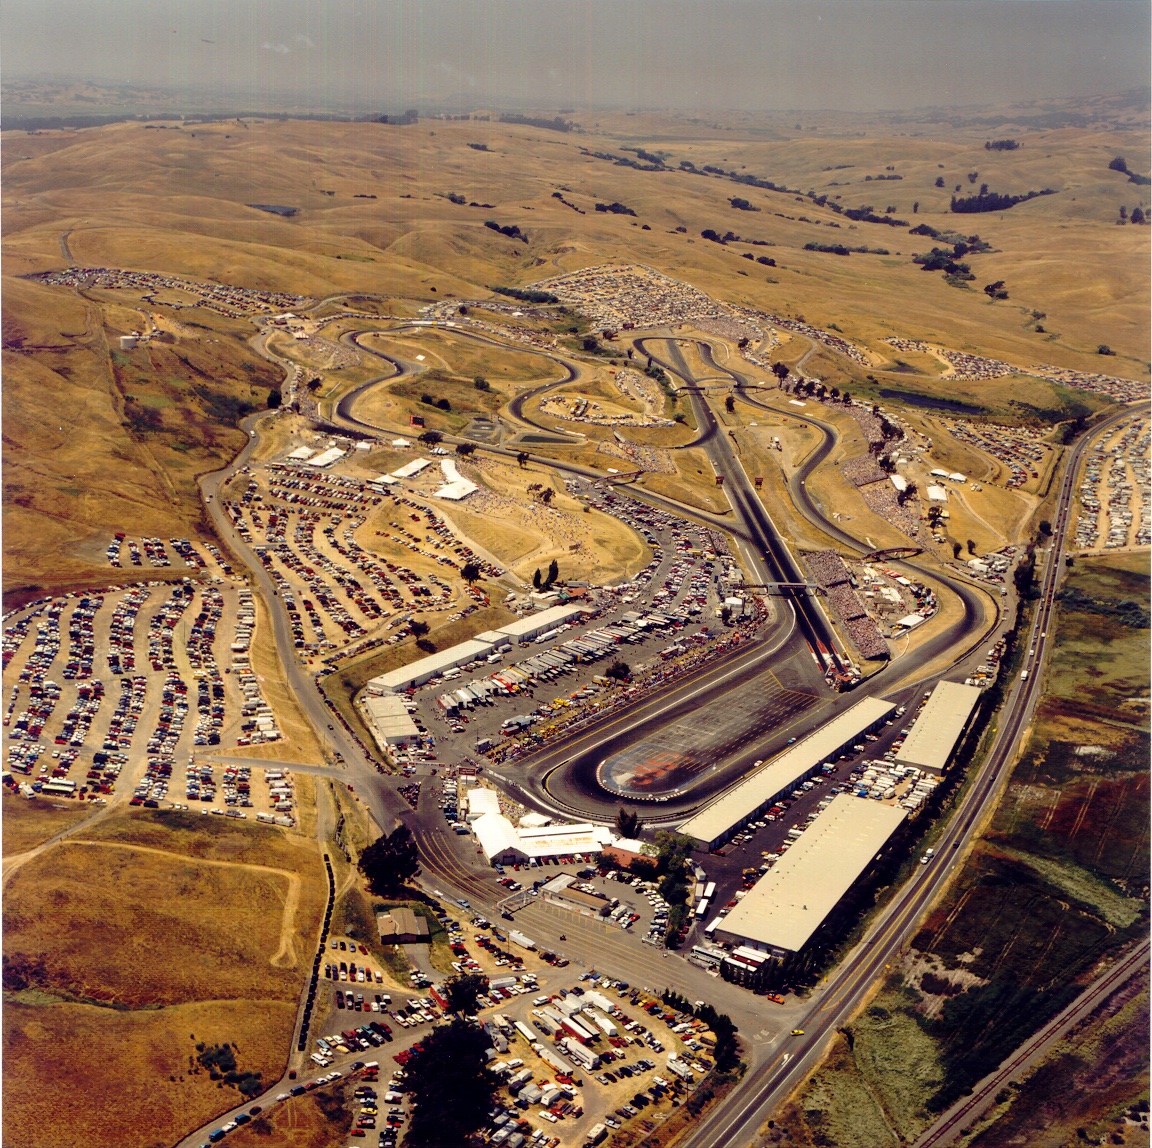 In honor of #ThrowbackWeek...

Any guesses on what year this photo was taken?   

#ToyotaSaveMart350 | @NASCAR